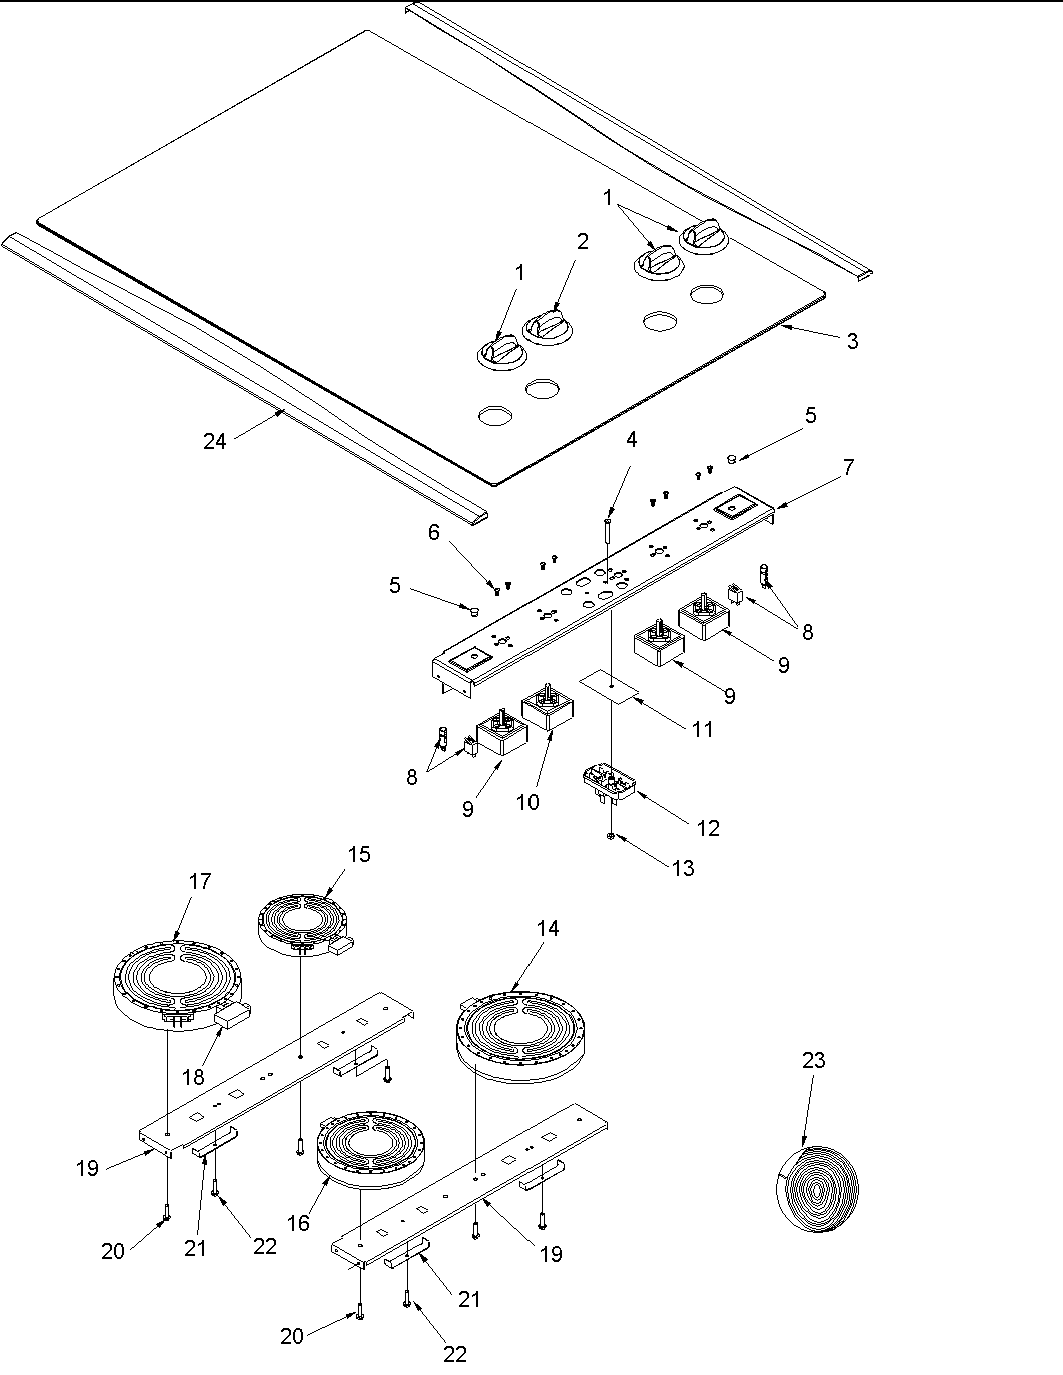 01 - COOKTOP ASSEMBLY